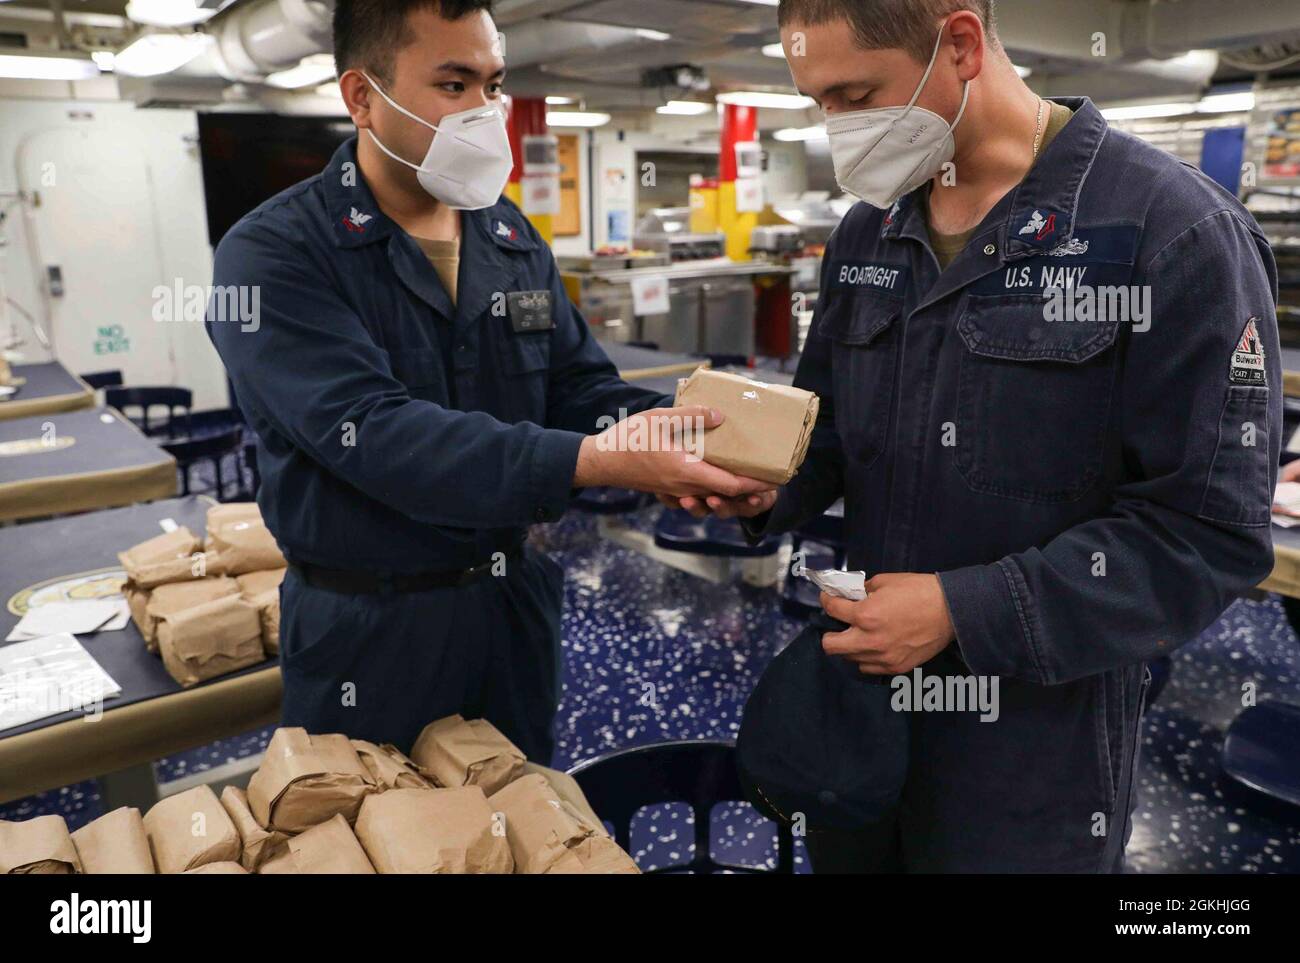 IRISH SEA (April 24, 2021) Culinary Specialist 2nd Class Jose Ramos, president of the junior enlisted association (JEA) aboard the Arleigh Burke-class guided-missile destroyer USS Ross (DDG 71), left, hands a care package to Boatswain’s Mate 2nd Class David Boatright as JEA assists the ship’s chapel in handing out cards and care packages sent by East Side Lutheran Church in Sioux Falls, South Dakota to the crew while underway in the Irish Sea, April 24, 2021. Ross, forward-deployed to Rota, Spain, is on patrol in the U.S. Sixth Fleet area of operations in support of regional allies and partner Stock Photo